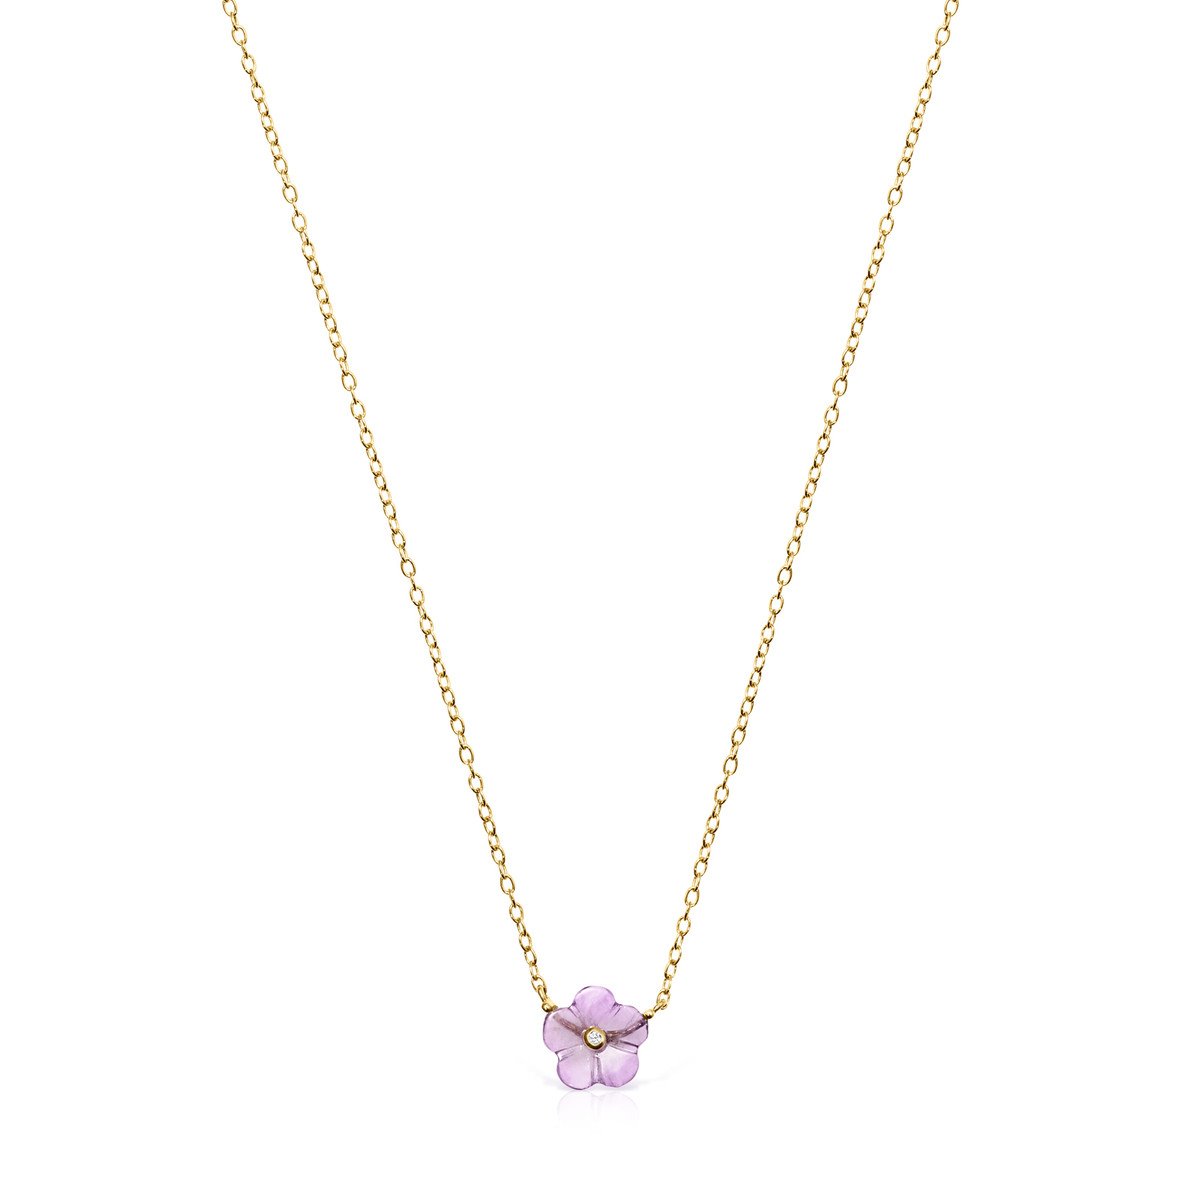 Tous Vita Necklace in Gold with Amethyst and Diamond 918532030